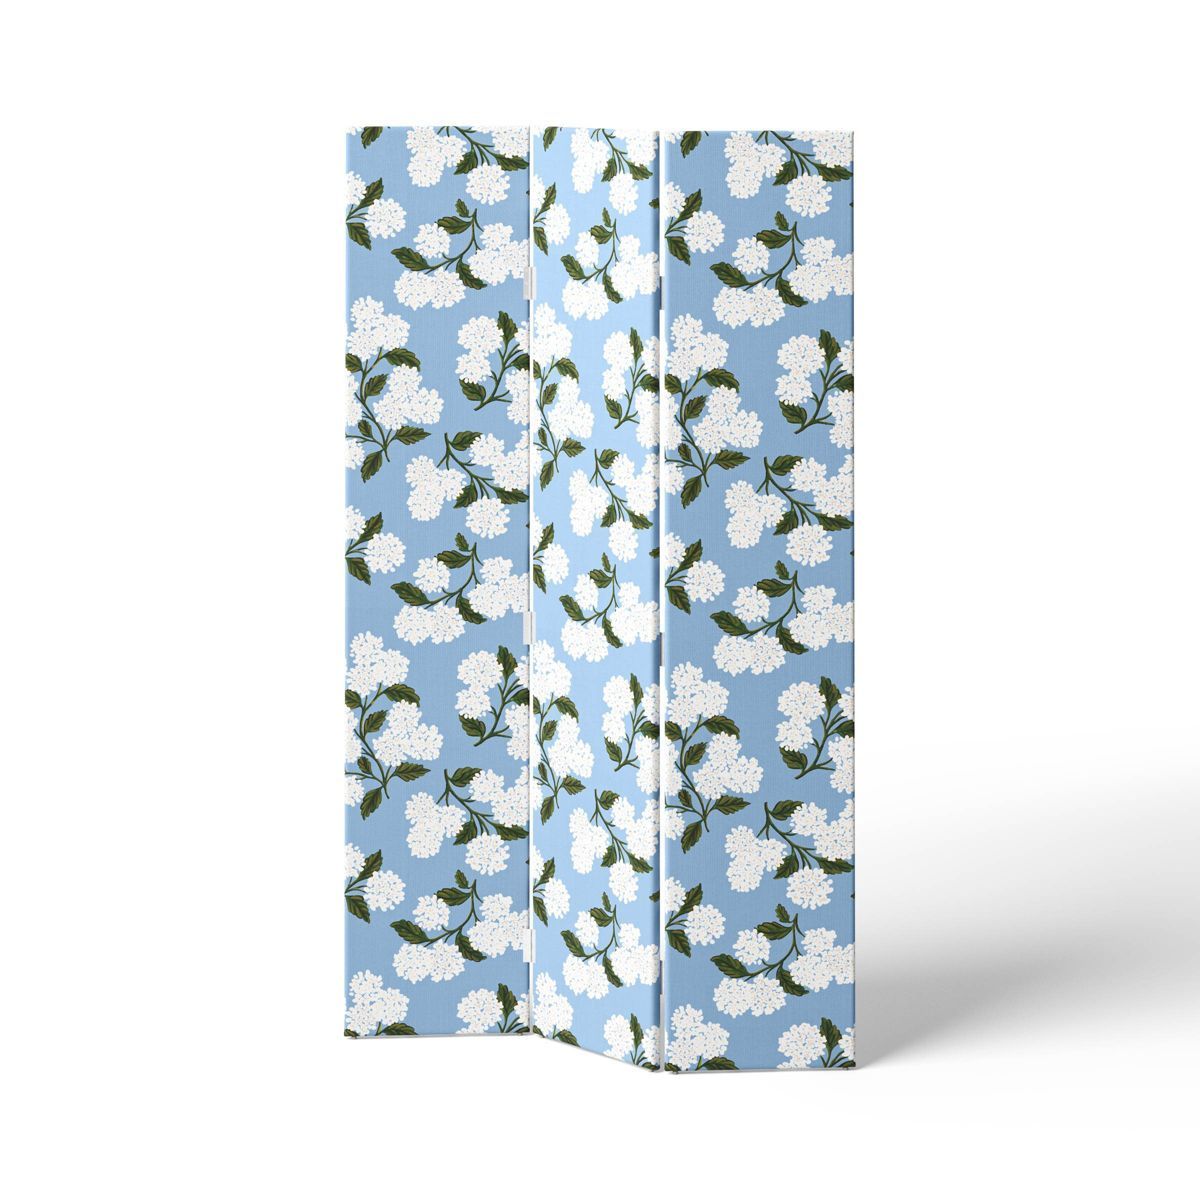 Rifle Paper Co. x Target 72" Room Divider Screen | Target